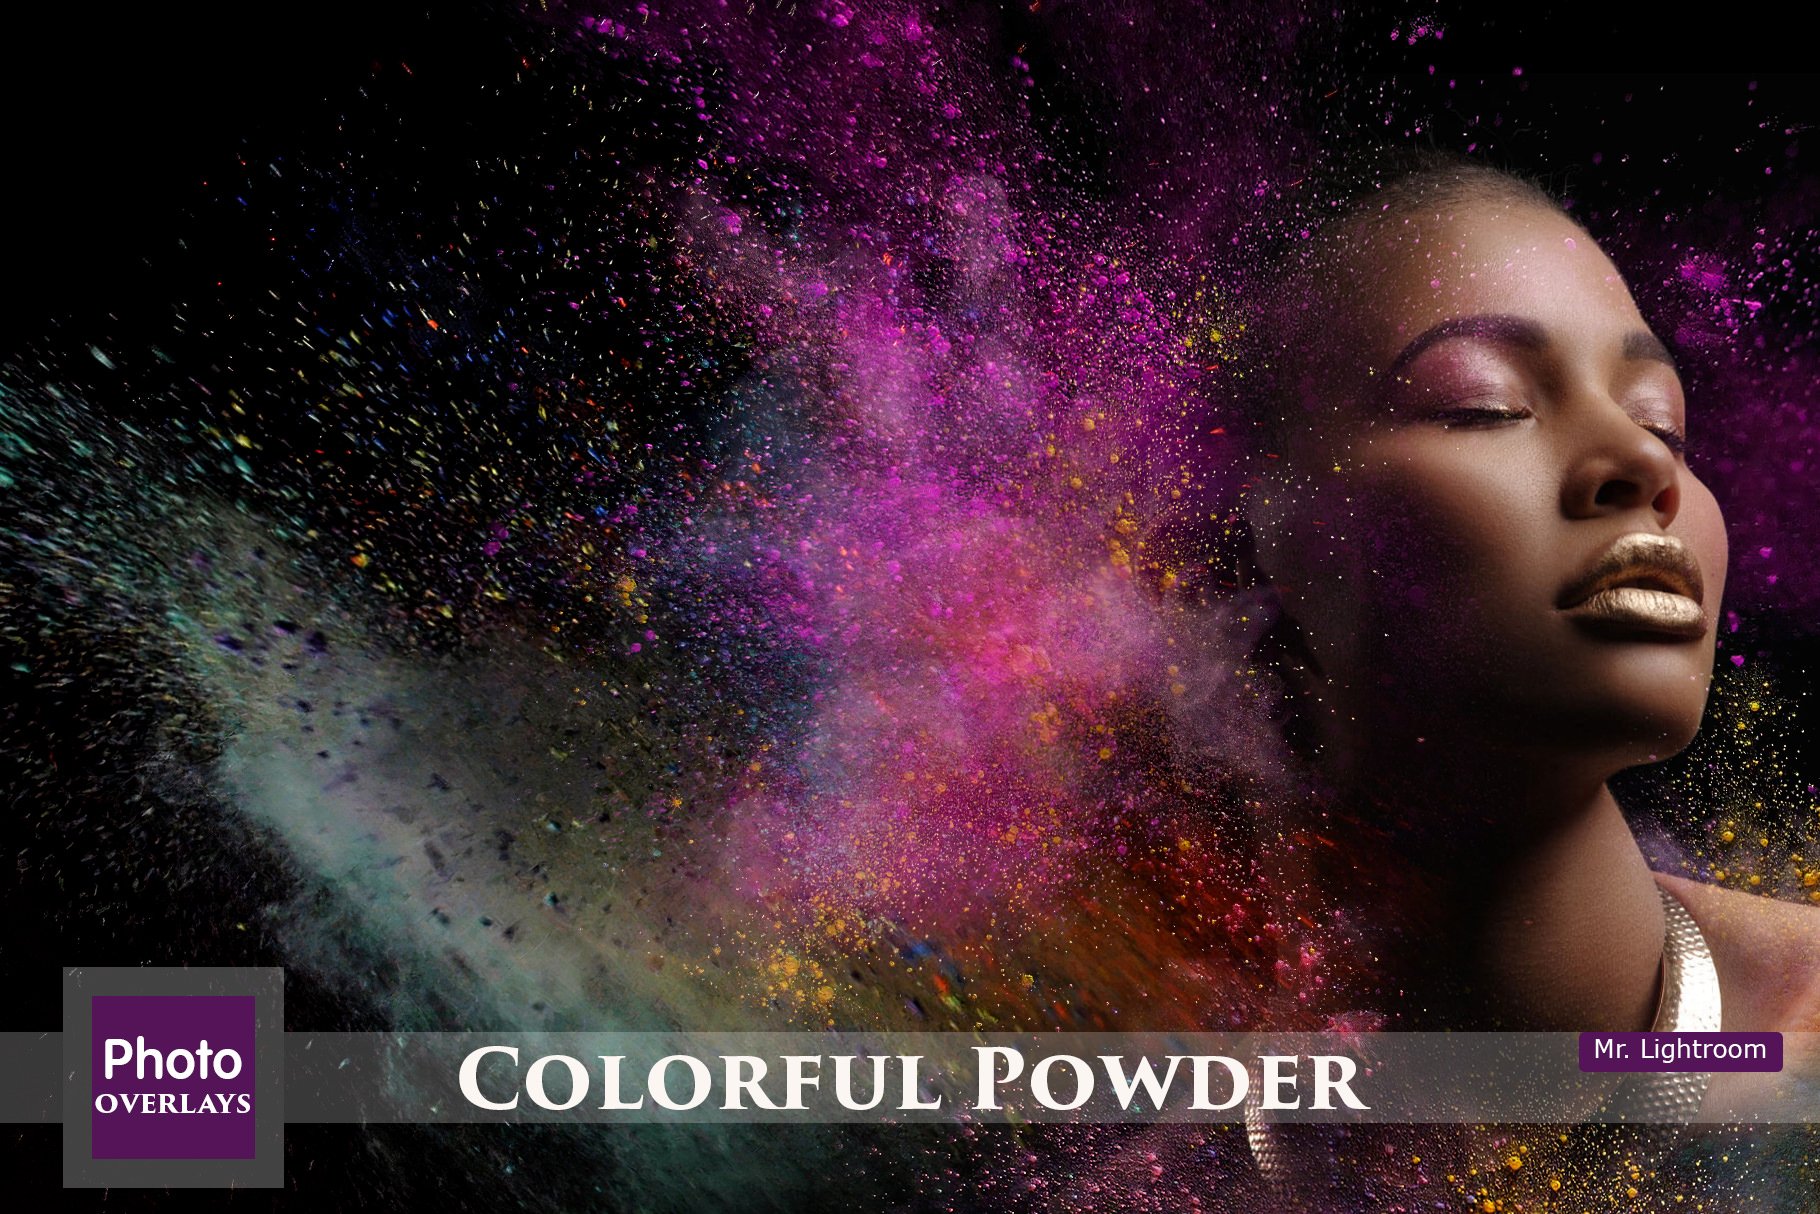 60 Colorful Powder Explosion Overlaycover image.